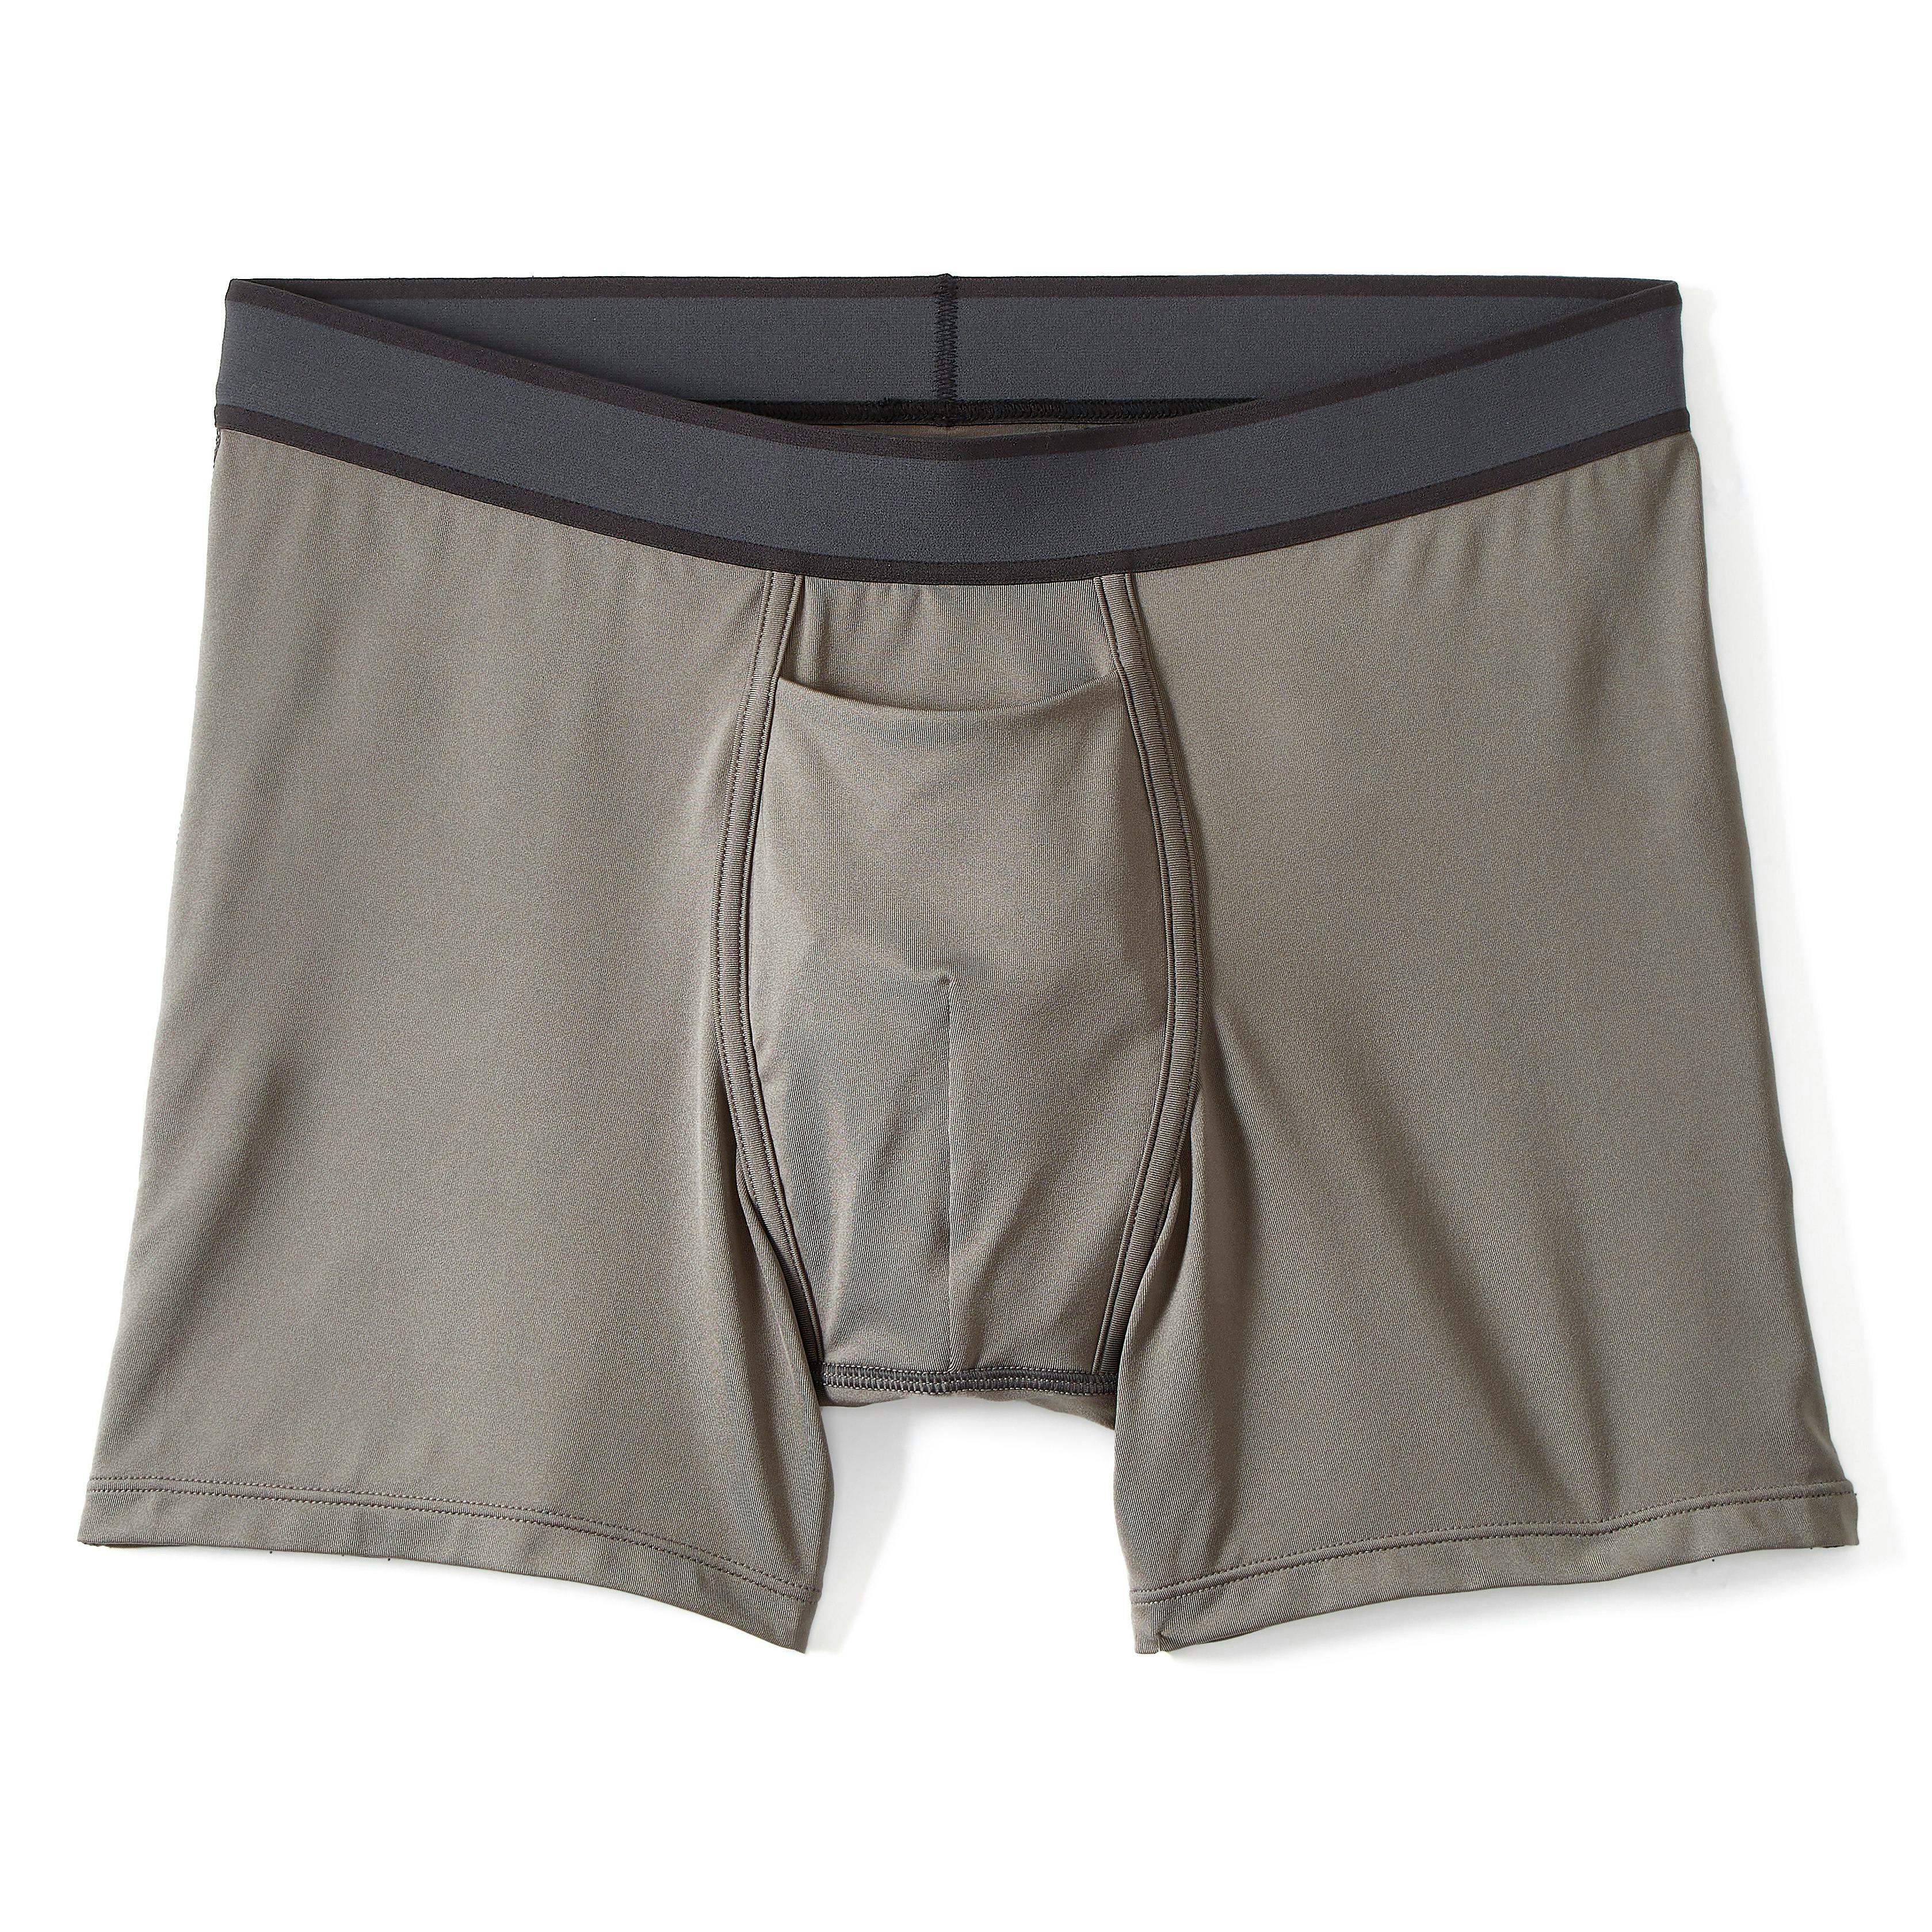 Proof Interval Boxer Briefs - 5